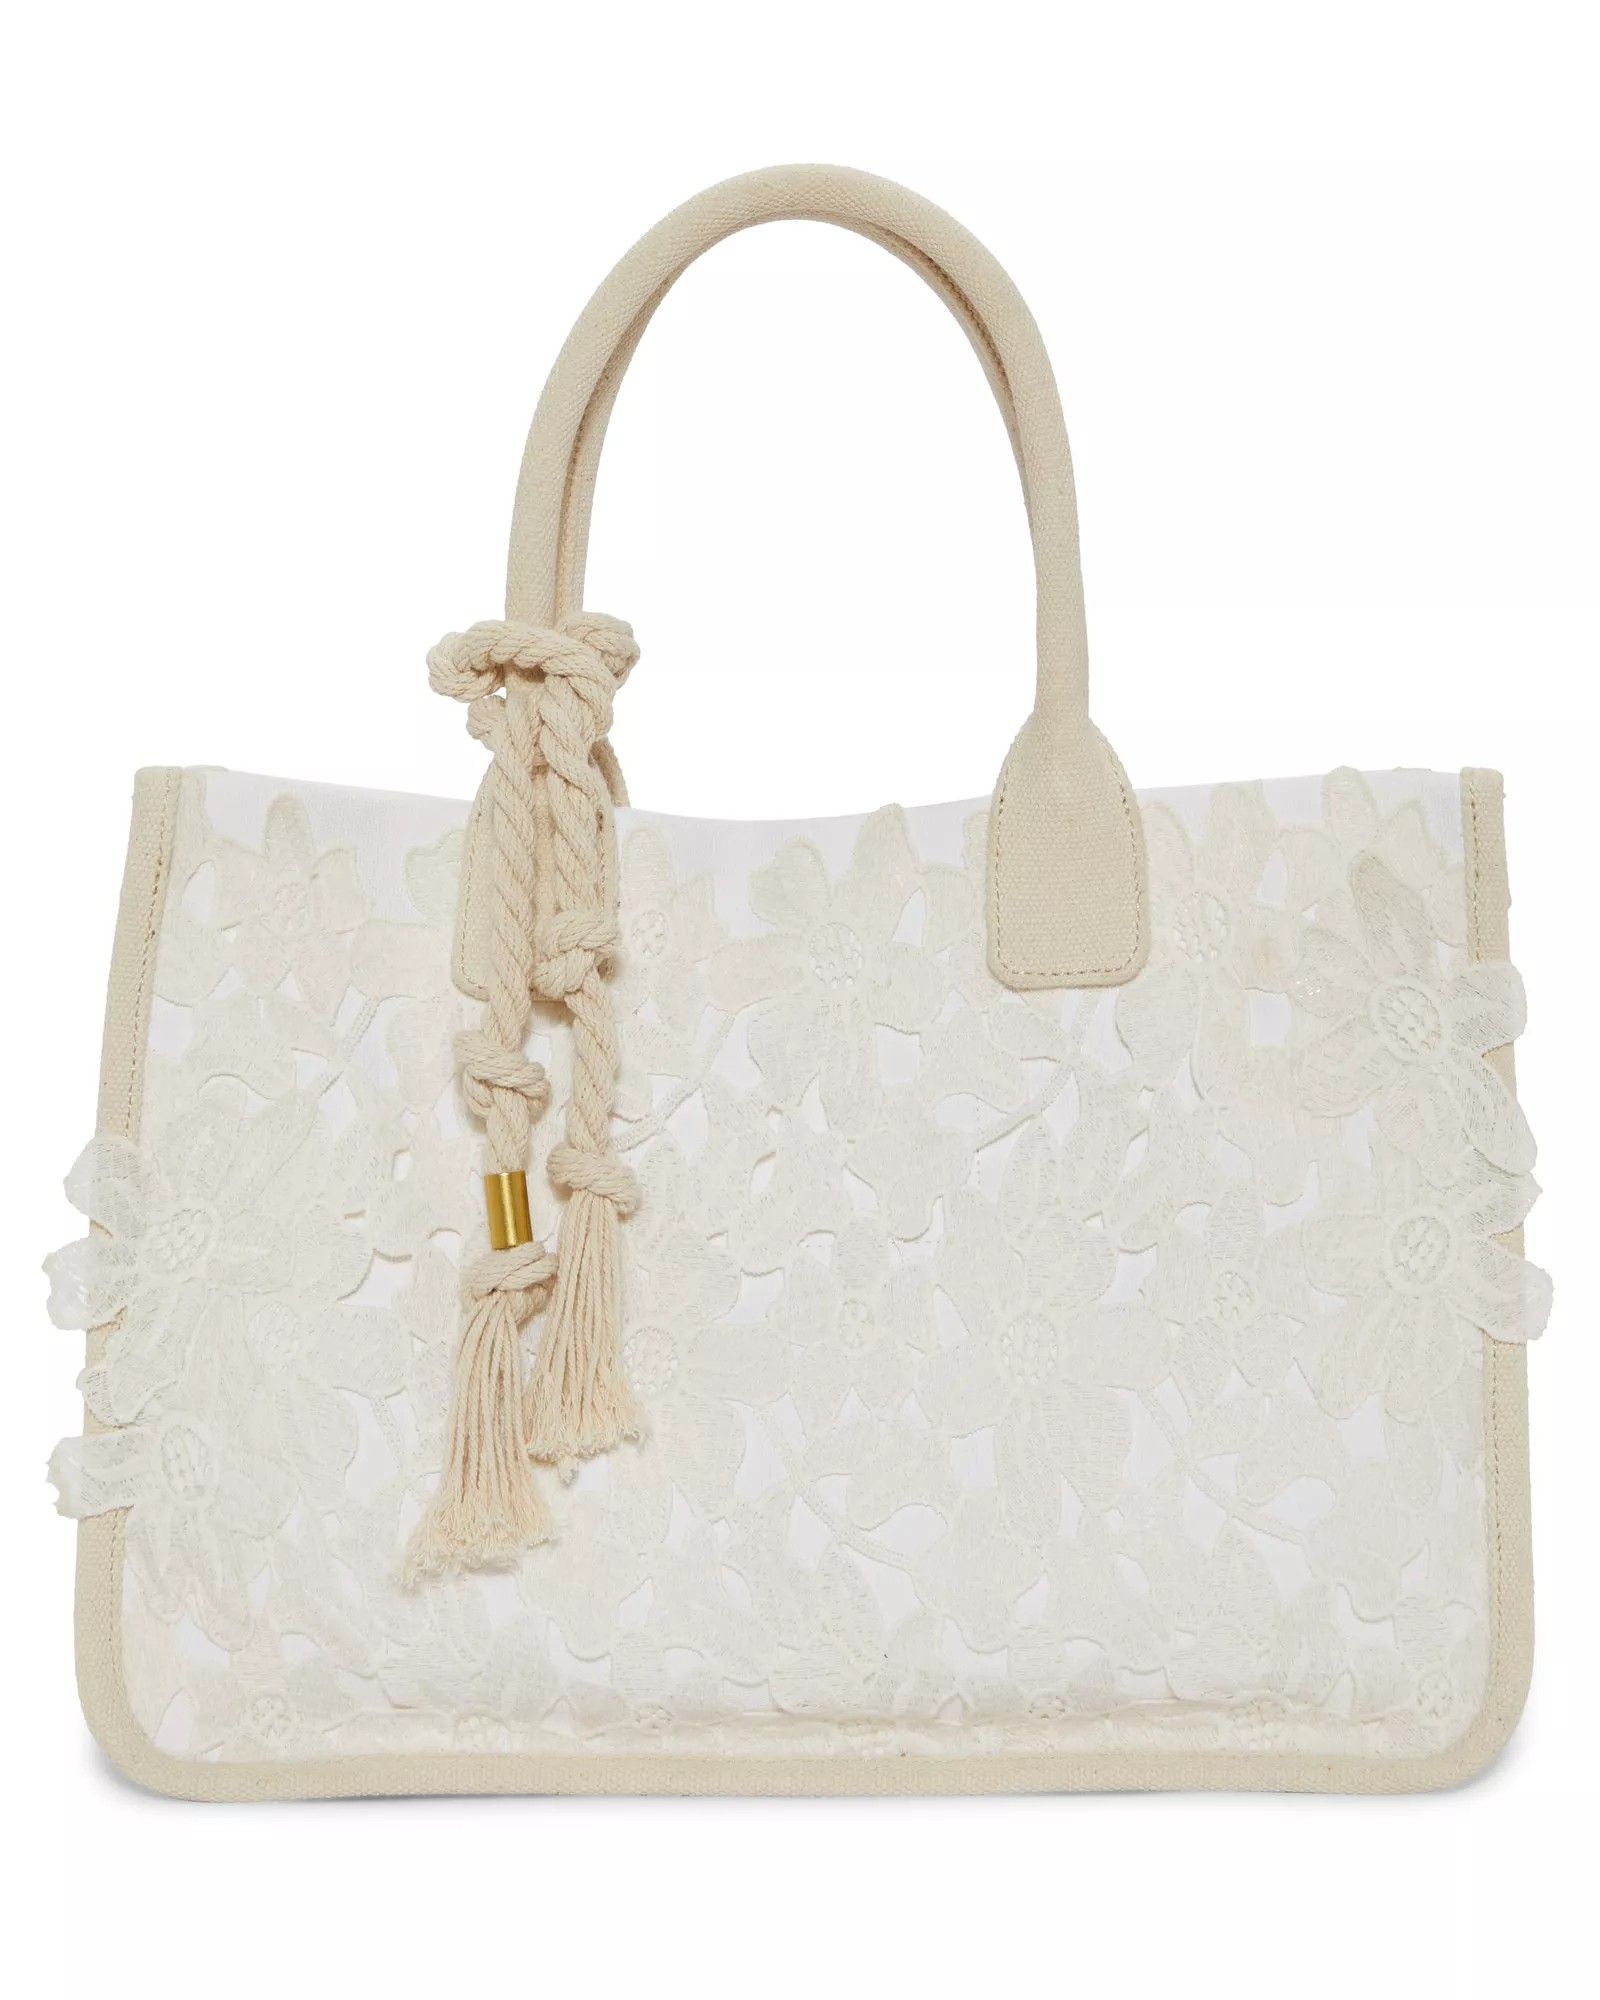 Vince Camuto Orla Crocheted Tote | Vince Camuto